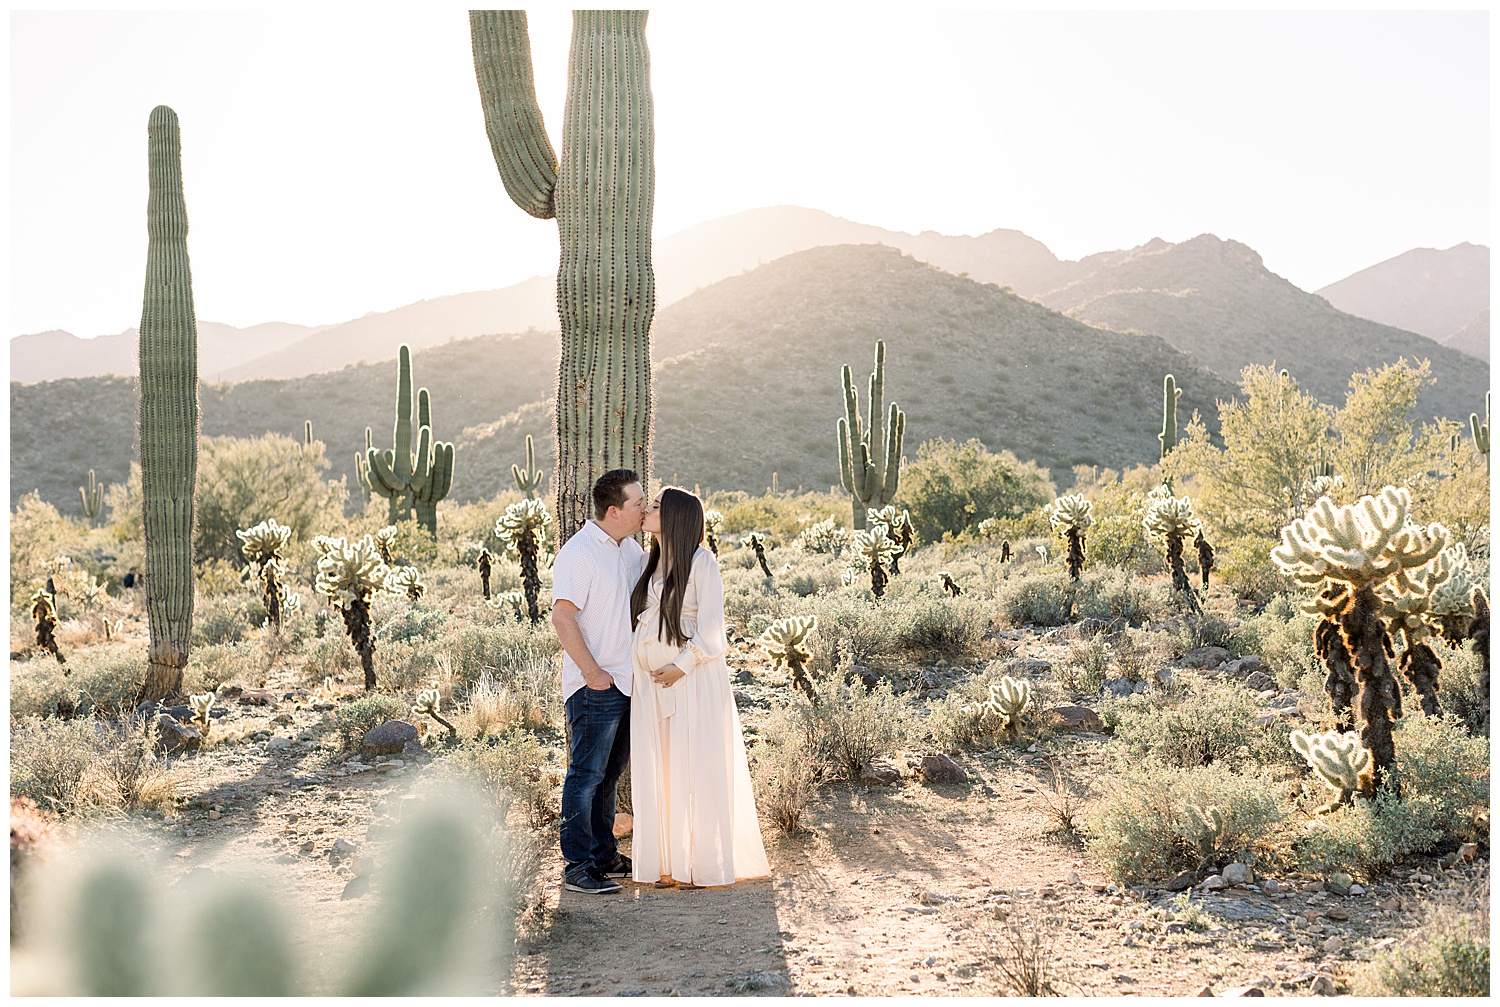 Sunset Arizona Maternity Session in the Desert, ivory gown, saguaros